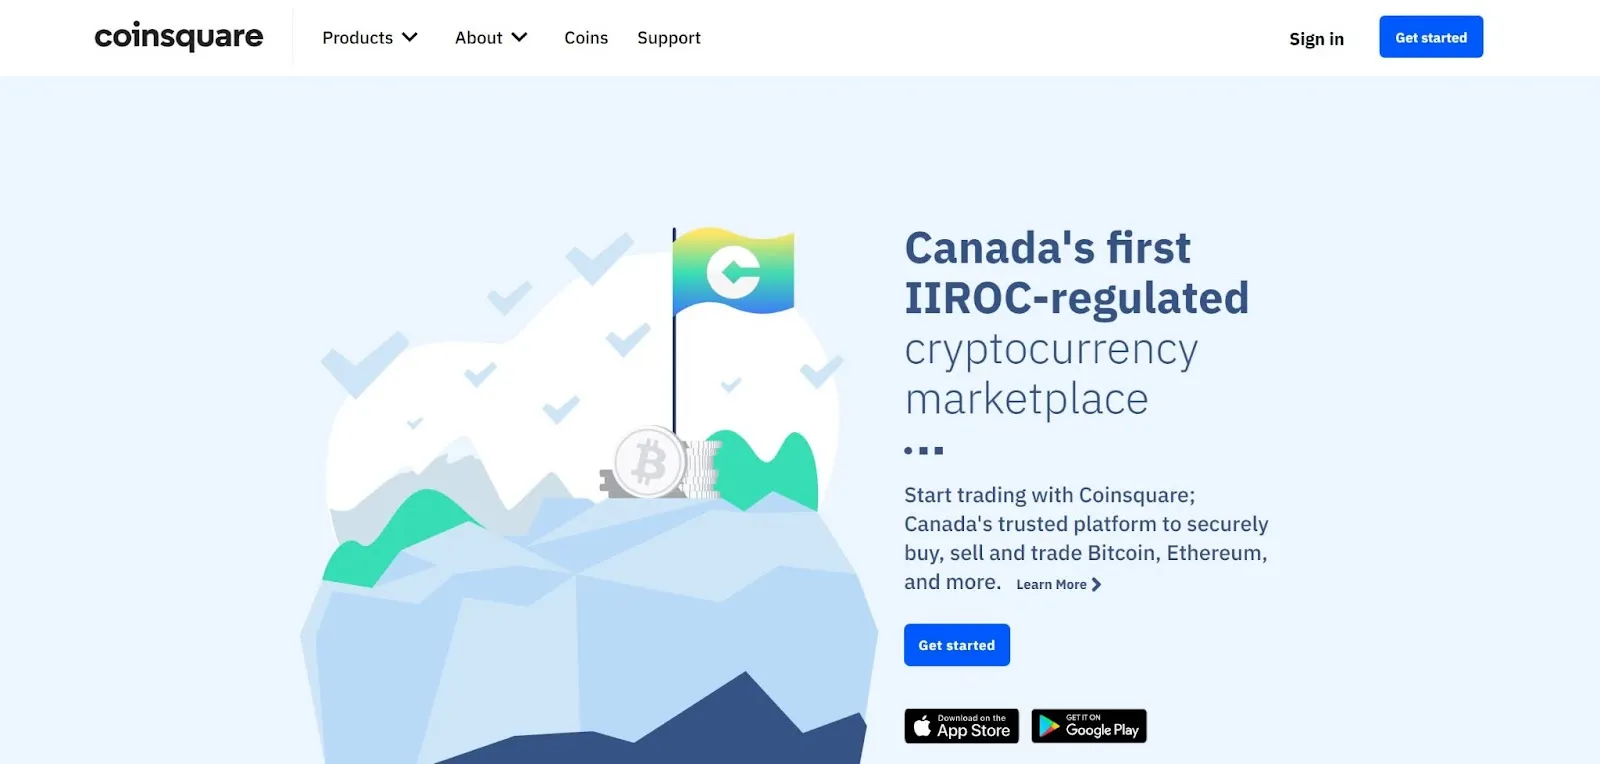 Coinsquare homepage interface